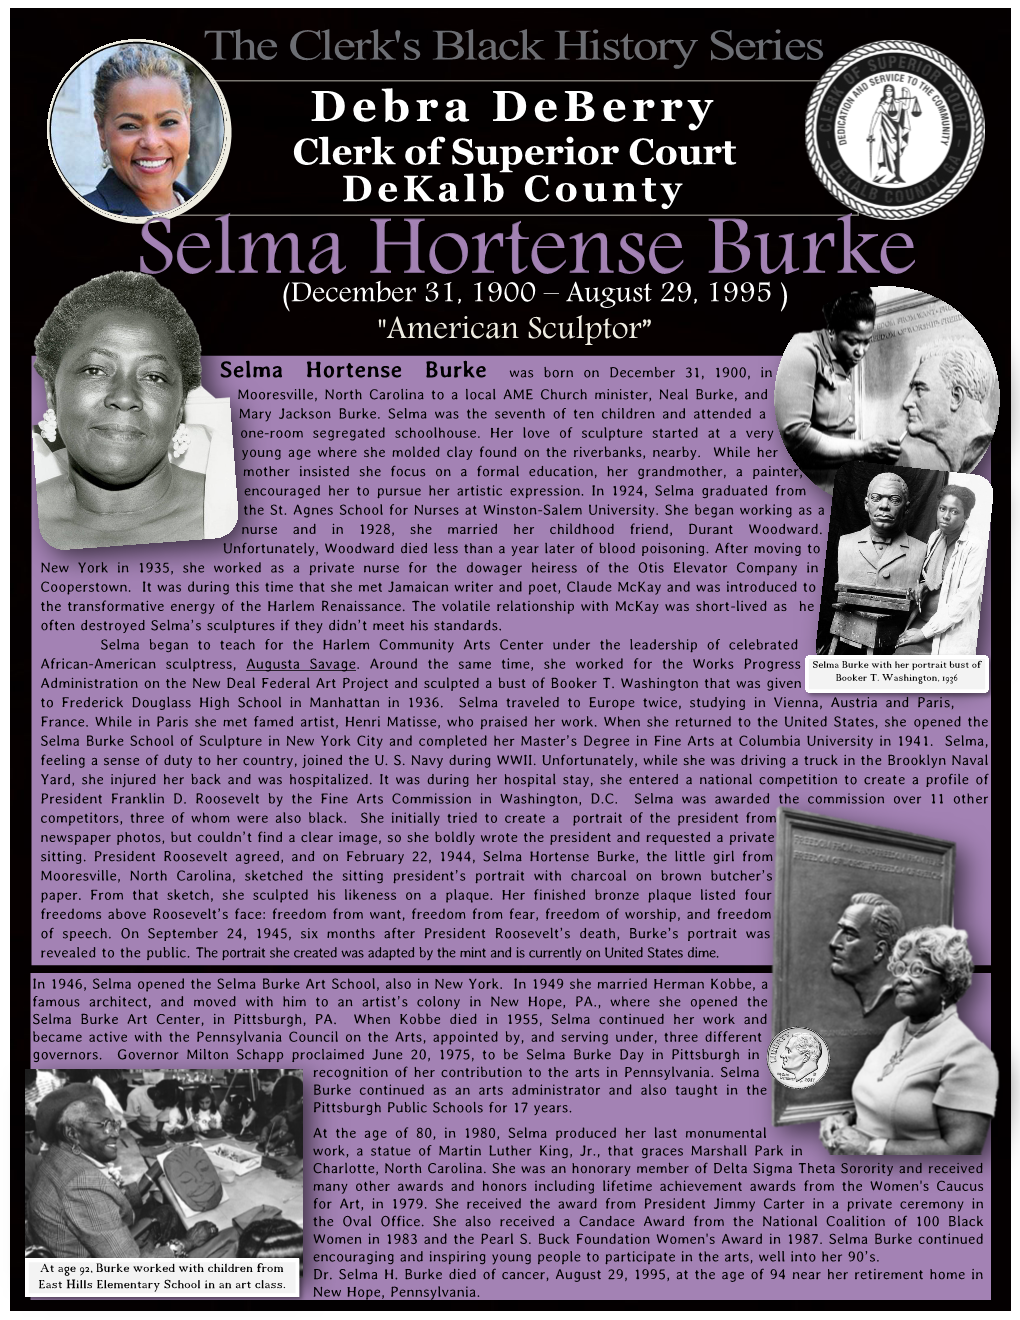 Selma Hortense Burke Was Born on December 31, 1900, in Mooresville, North Carolina to a Local AME Church Minister, Neal Burke, and Mary Jackson Burke